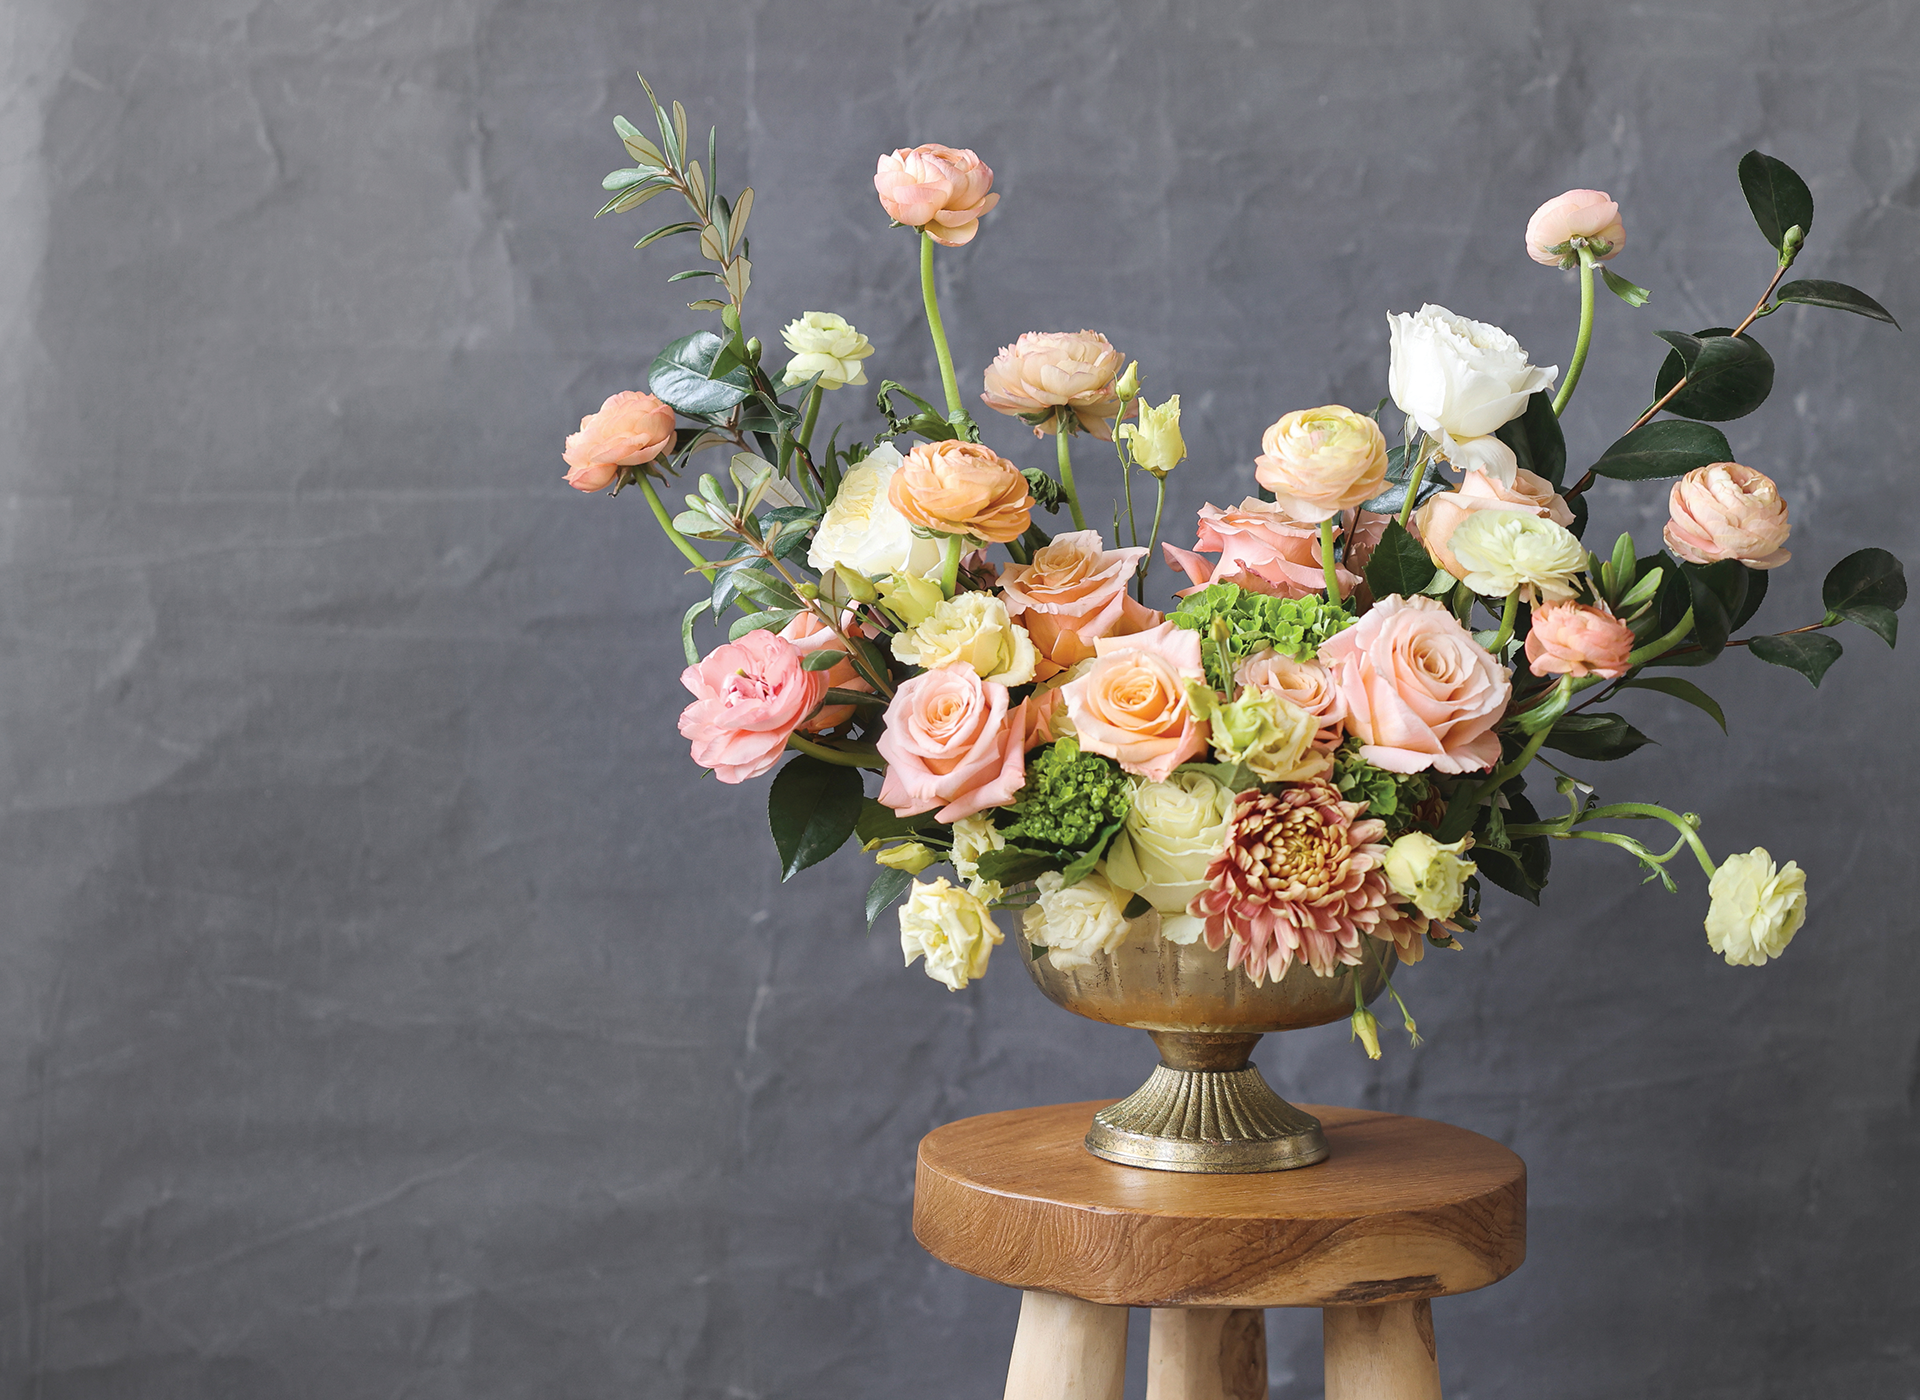 Floral Supplies & Tools for Your Fresh-Cut Wholesale Flowers